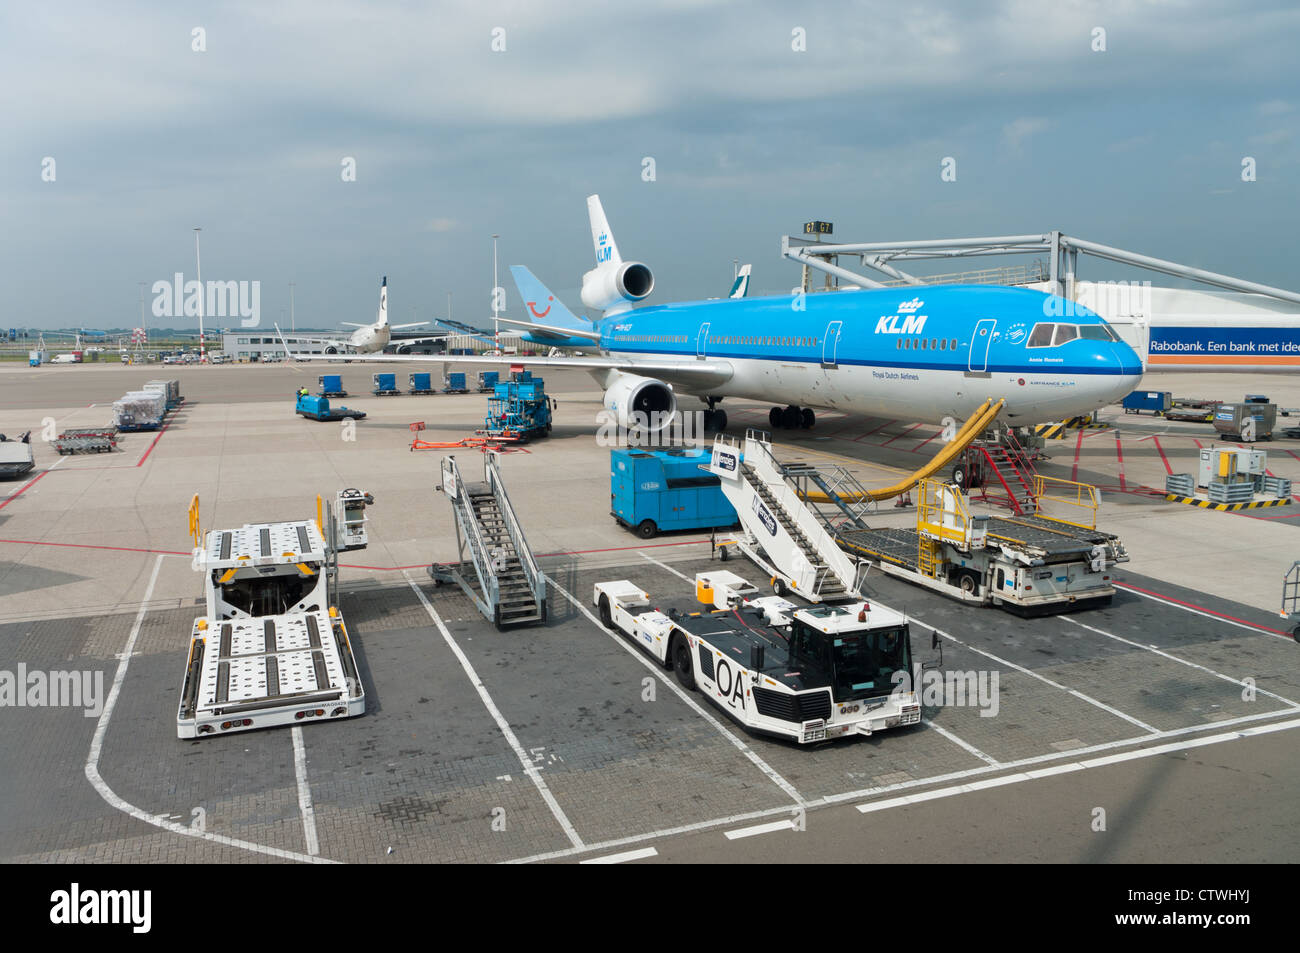 KLM plane being loaded at Schiphol Airport August 21, 2011 in Amsterdam, Netherlands. There are 163 destinations served by KLM, Stock Photo